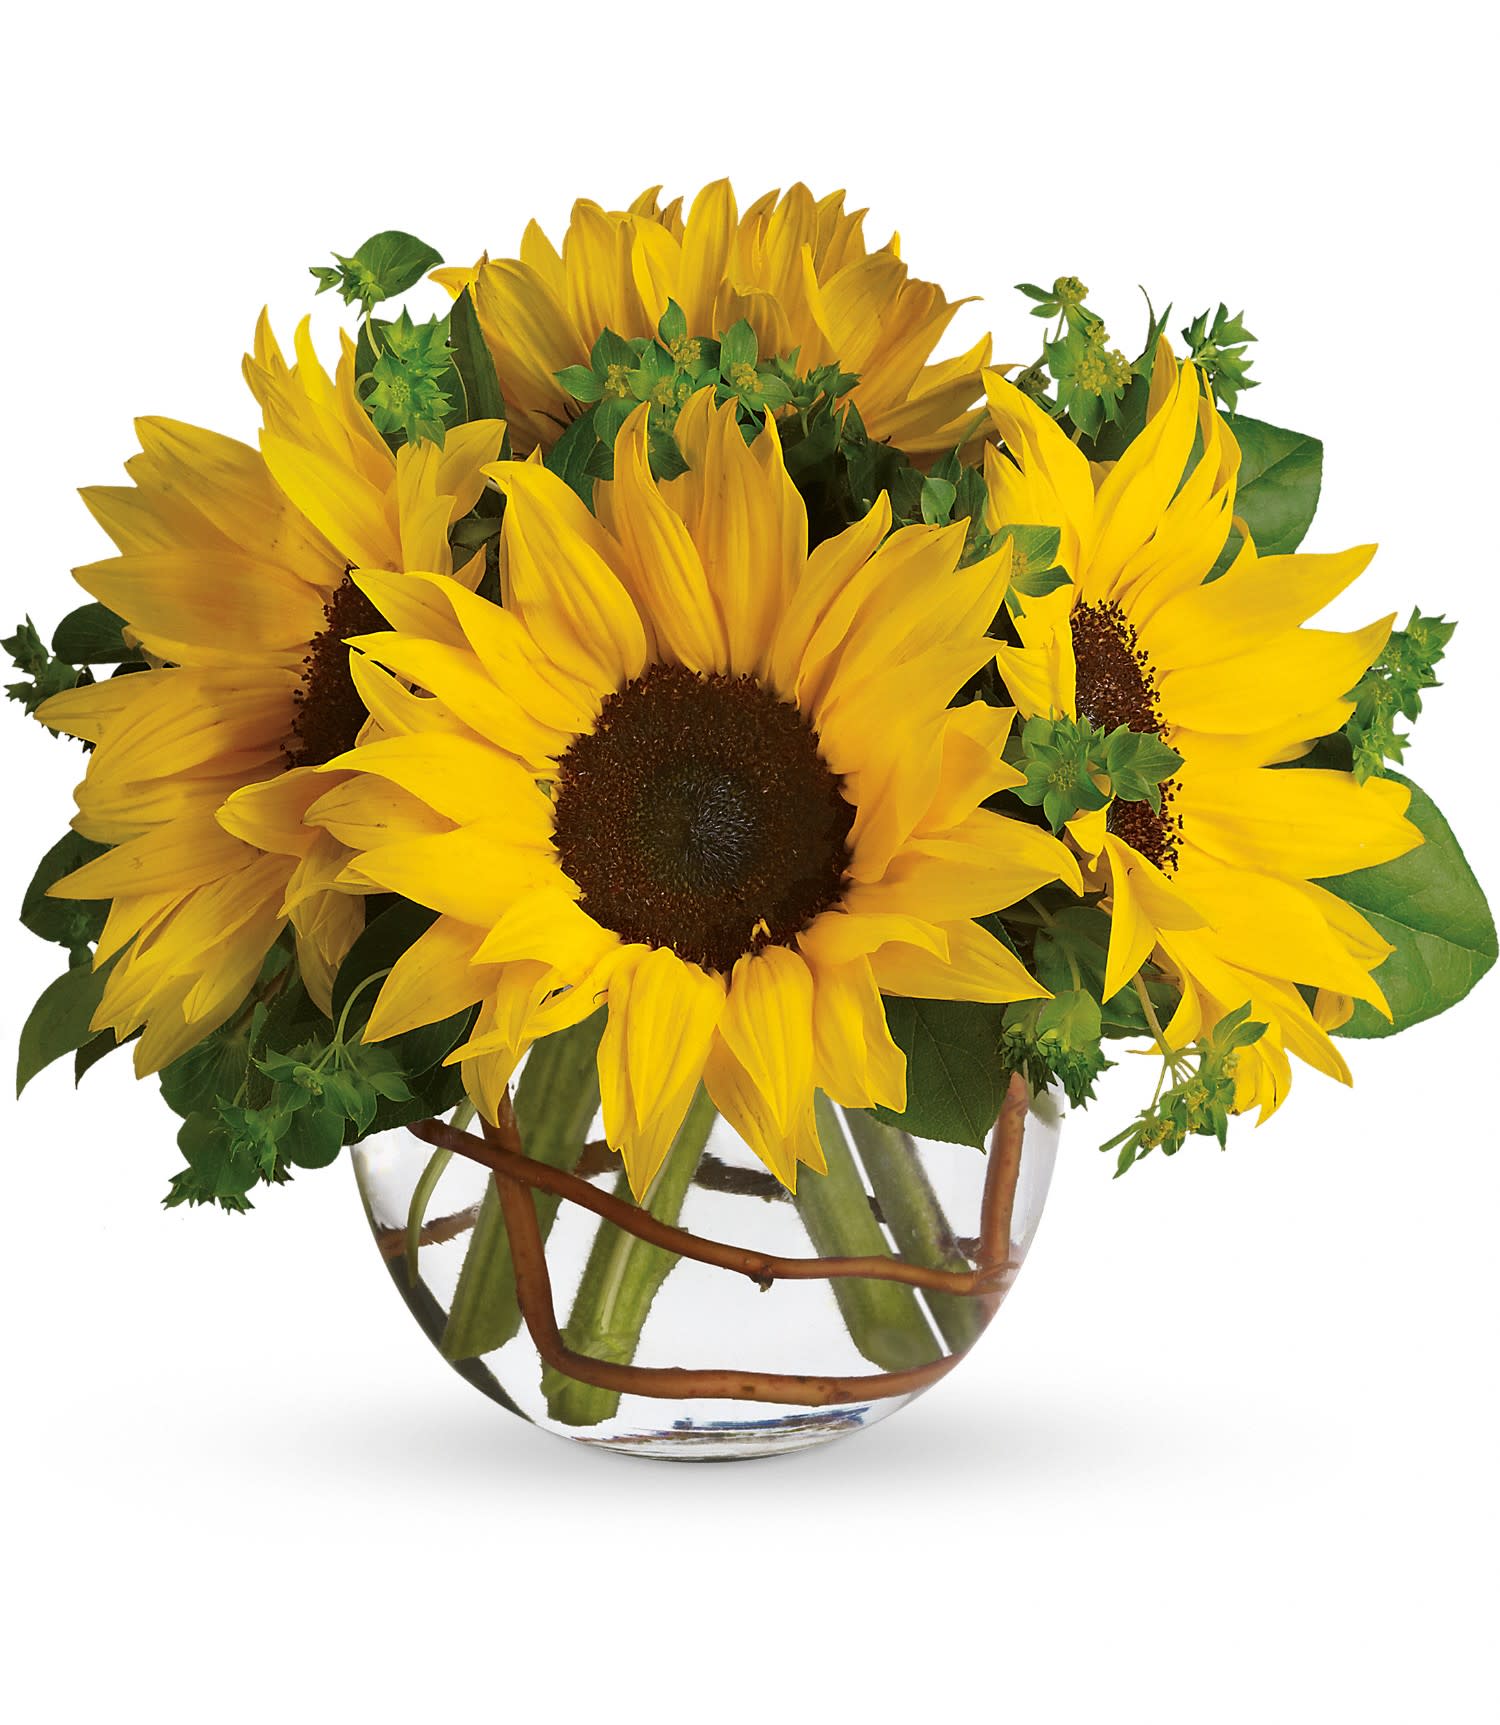 Sunny Sunflower by Teleflora - Whoever receives this stunning bouquet is sure to be bowled over by its bold beauty! It's big on fun and big on flowers.